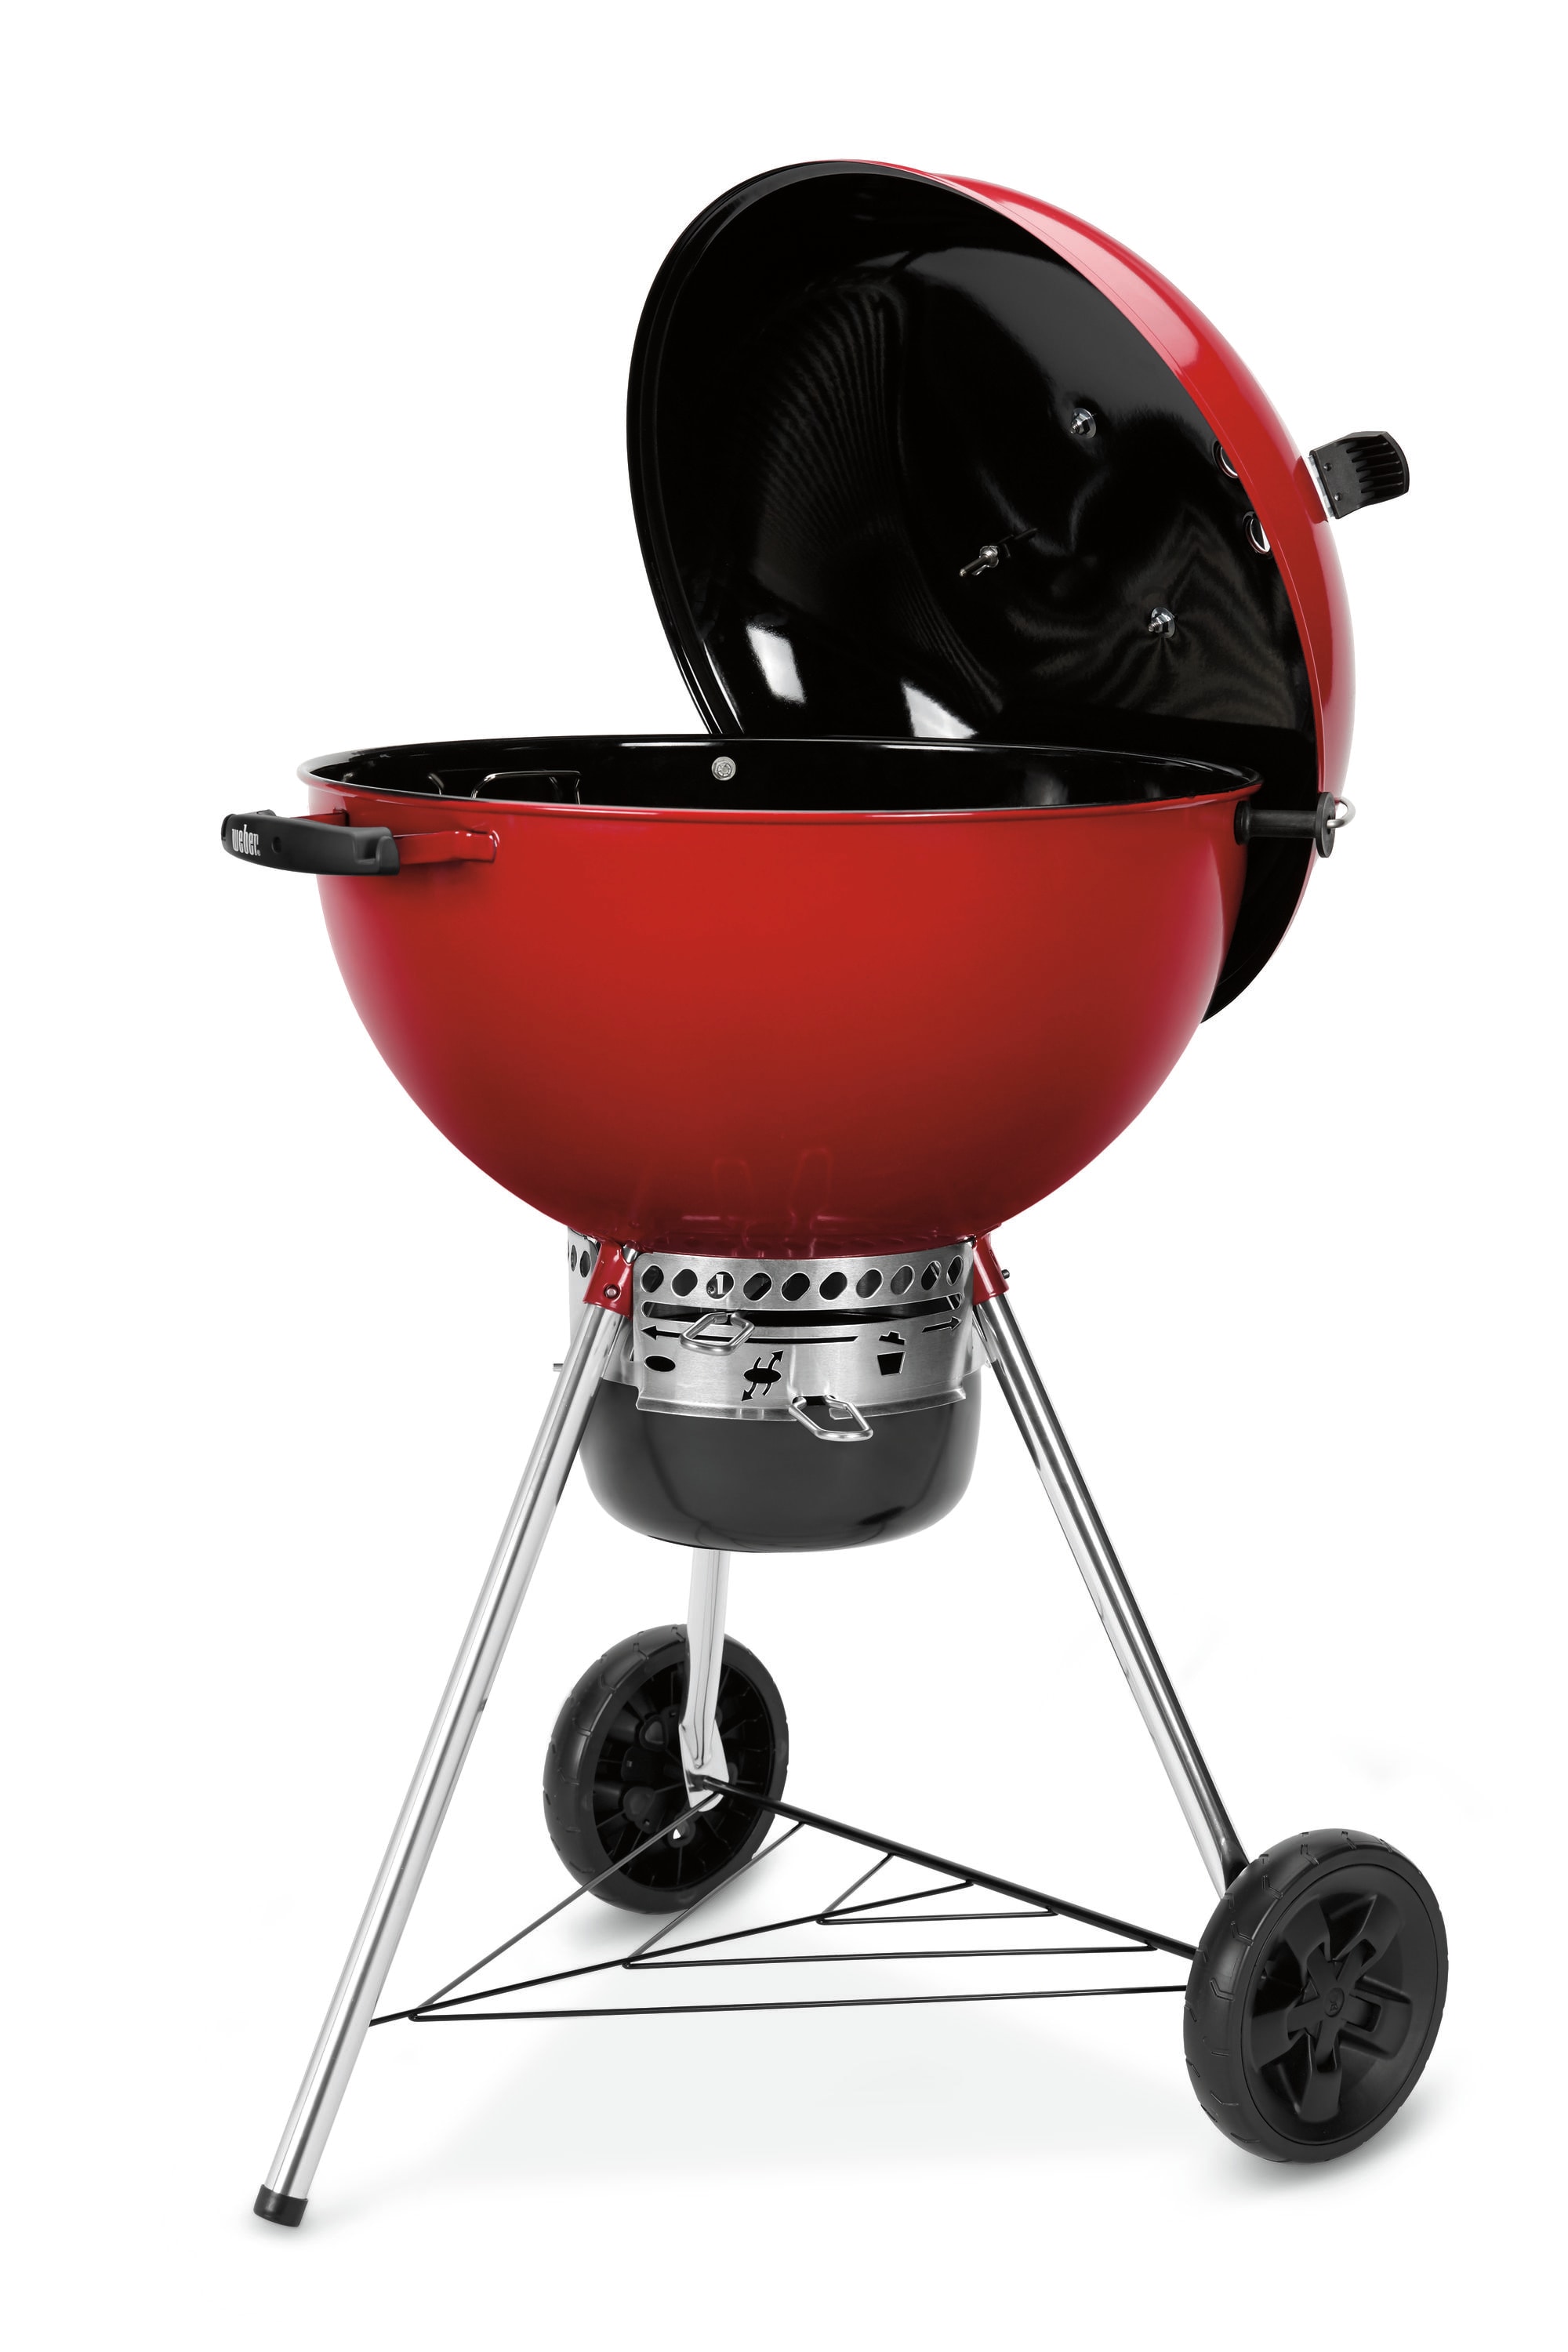 Weber Limited Edition Original Kettle Premium W Kettle Charcoal at Lowes.com